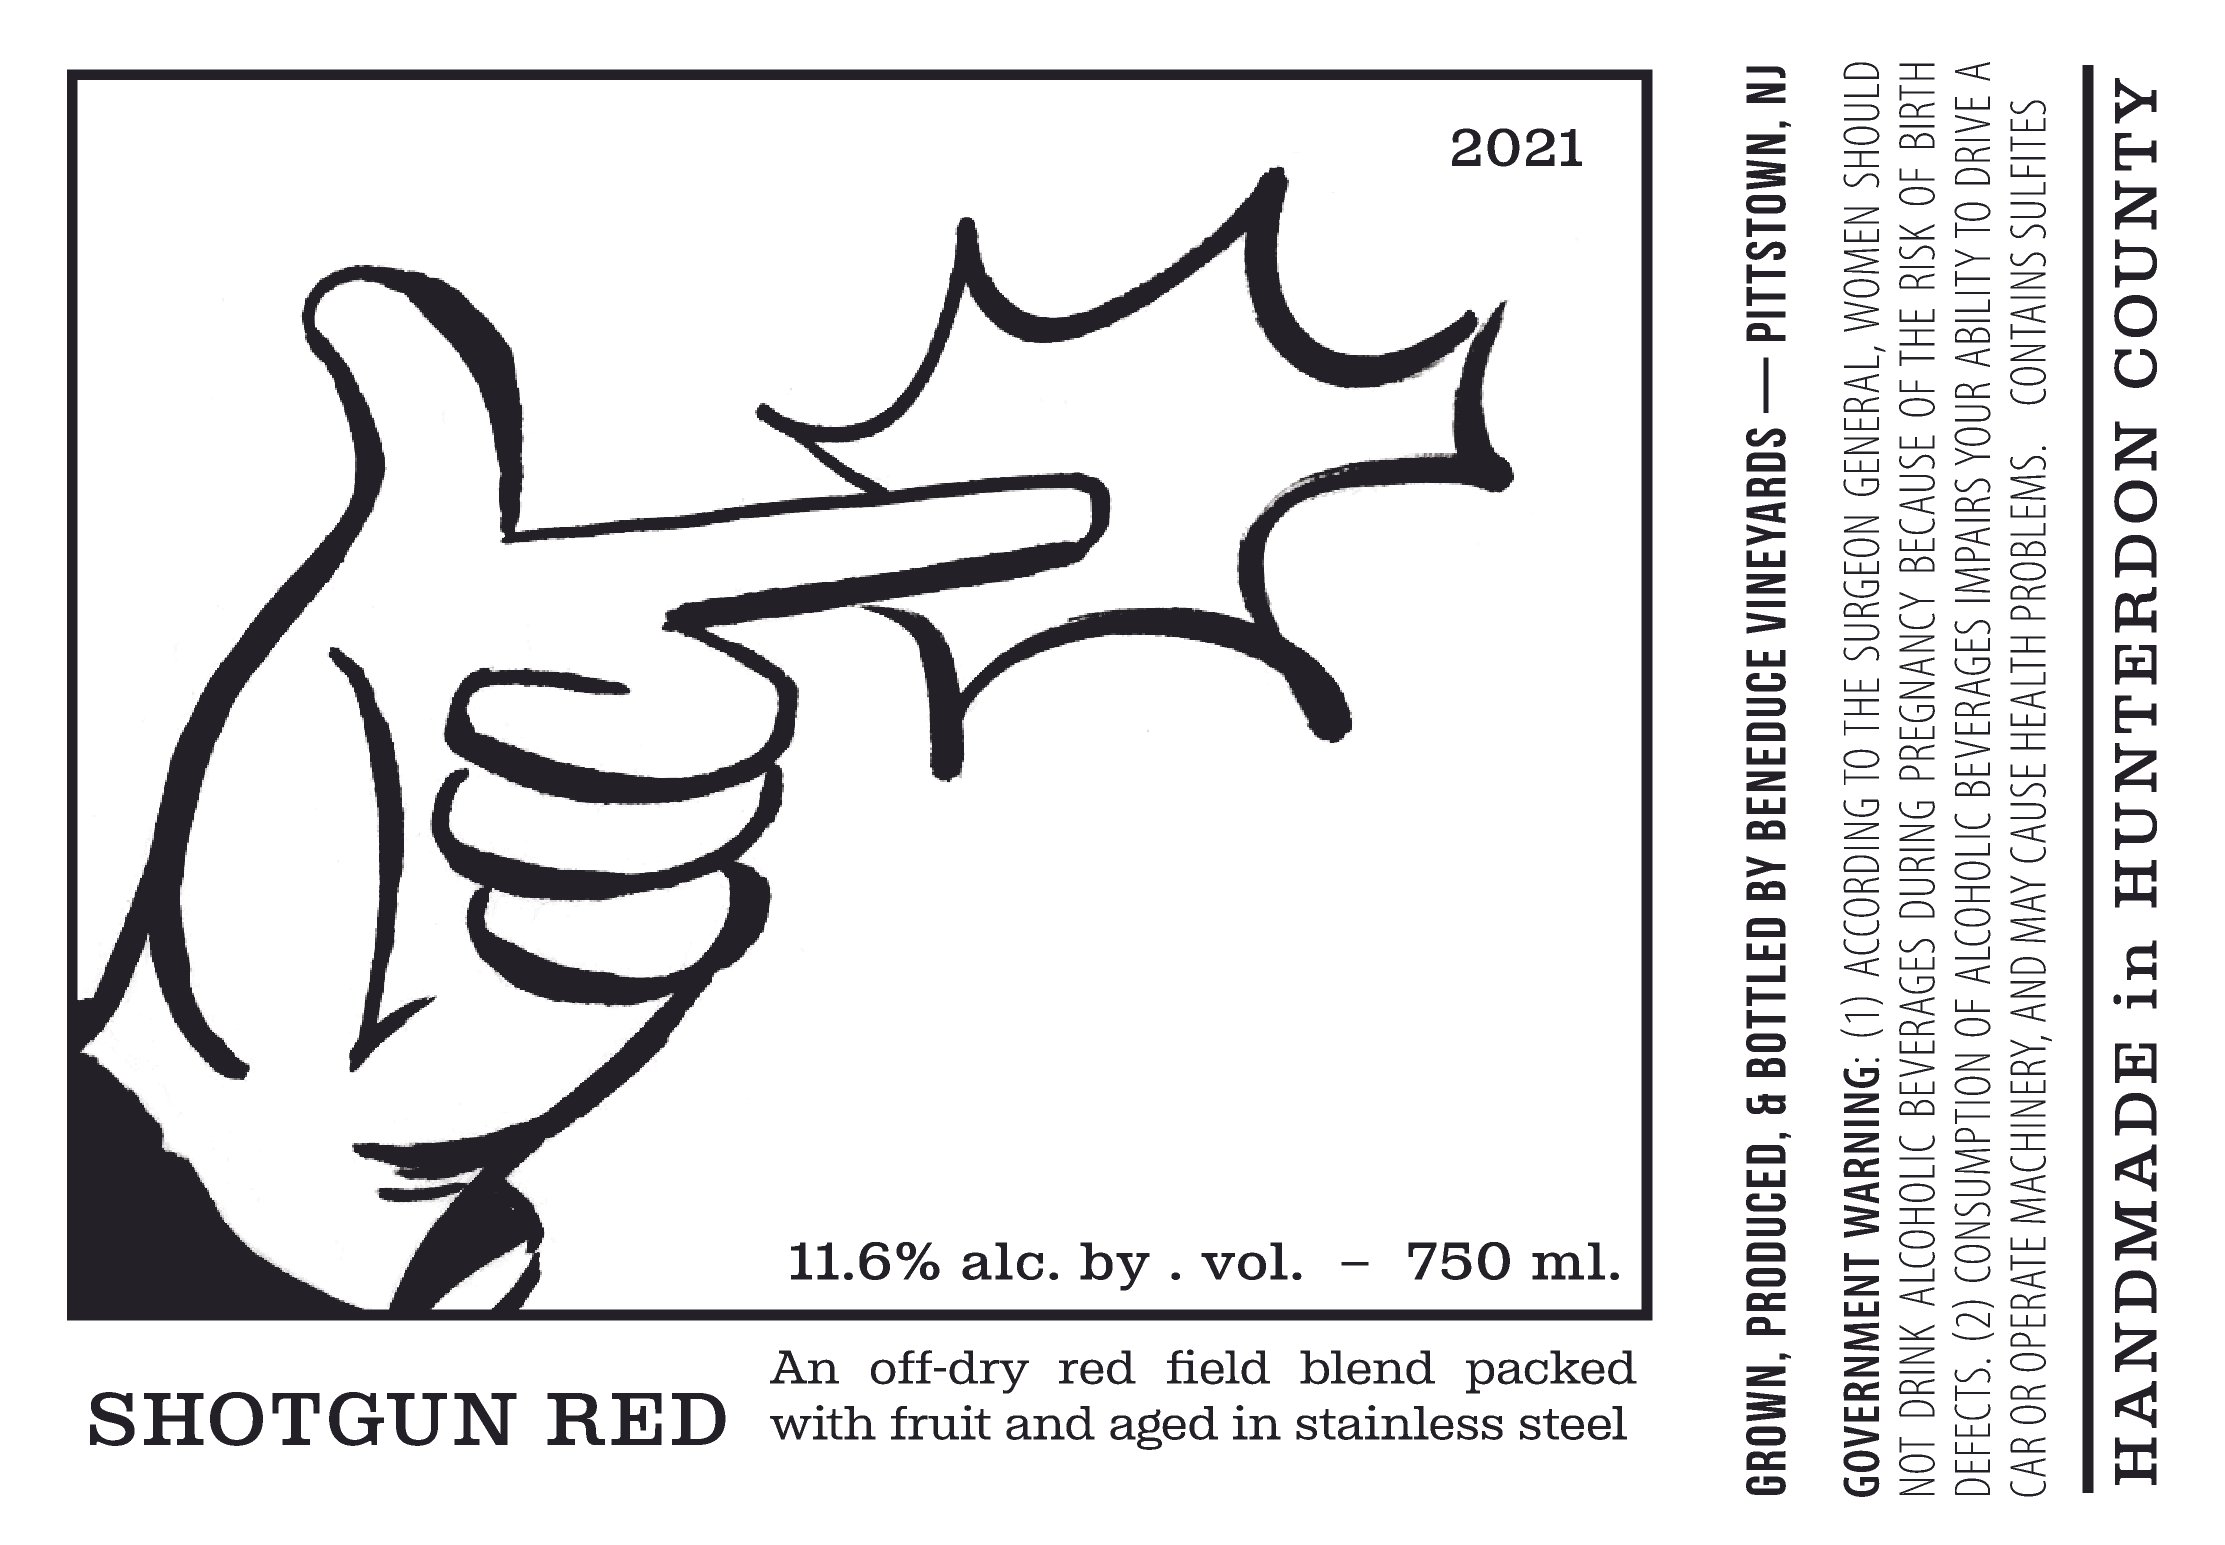 Product Image for 2021 Shotgun Red